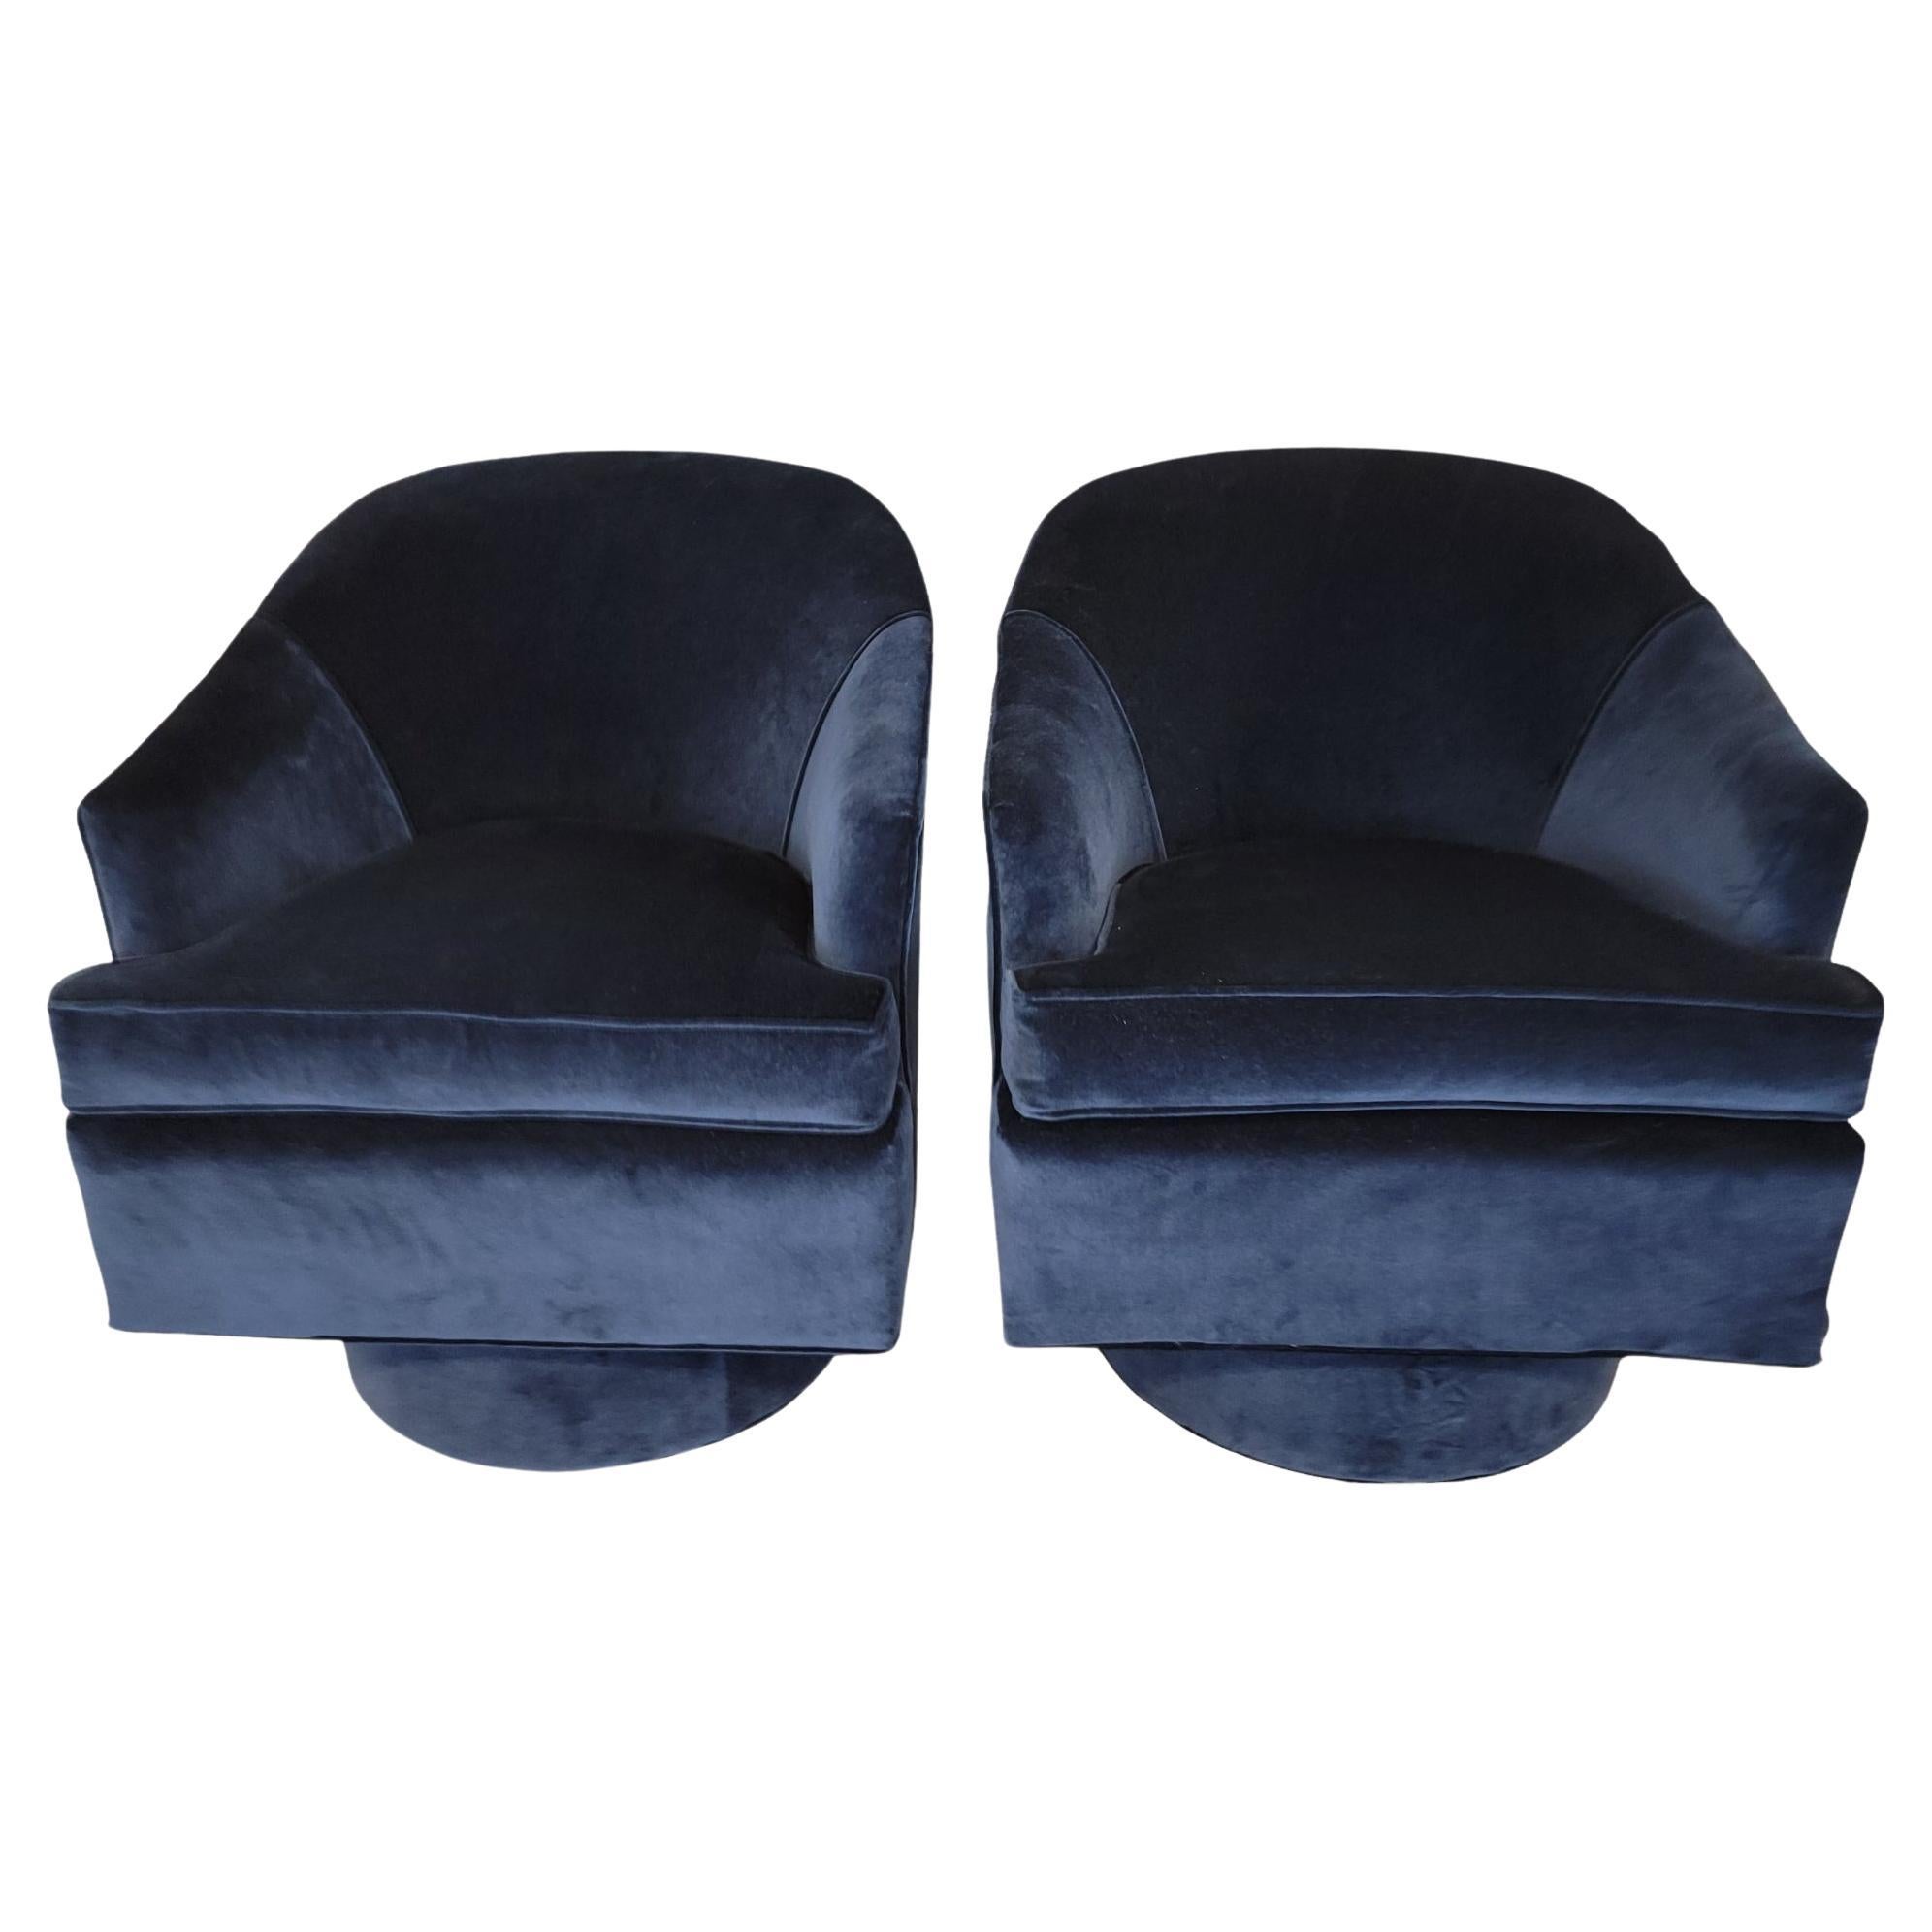 Navy Blue Drexel Swivel Chairs For Sale